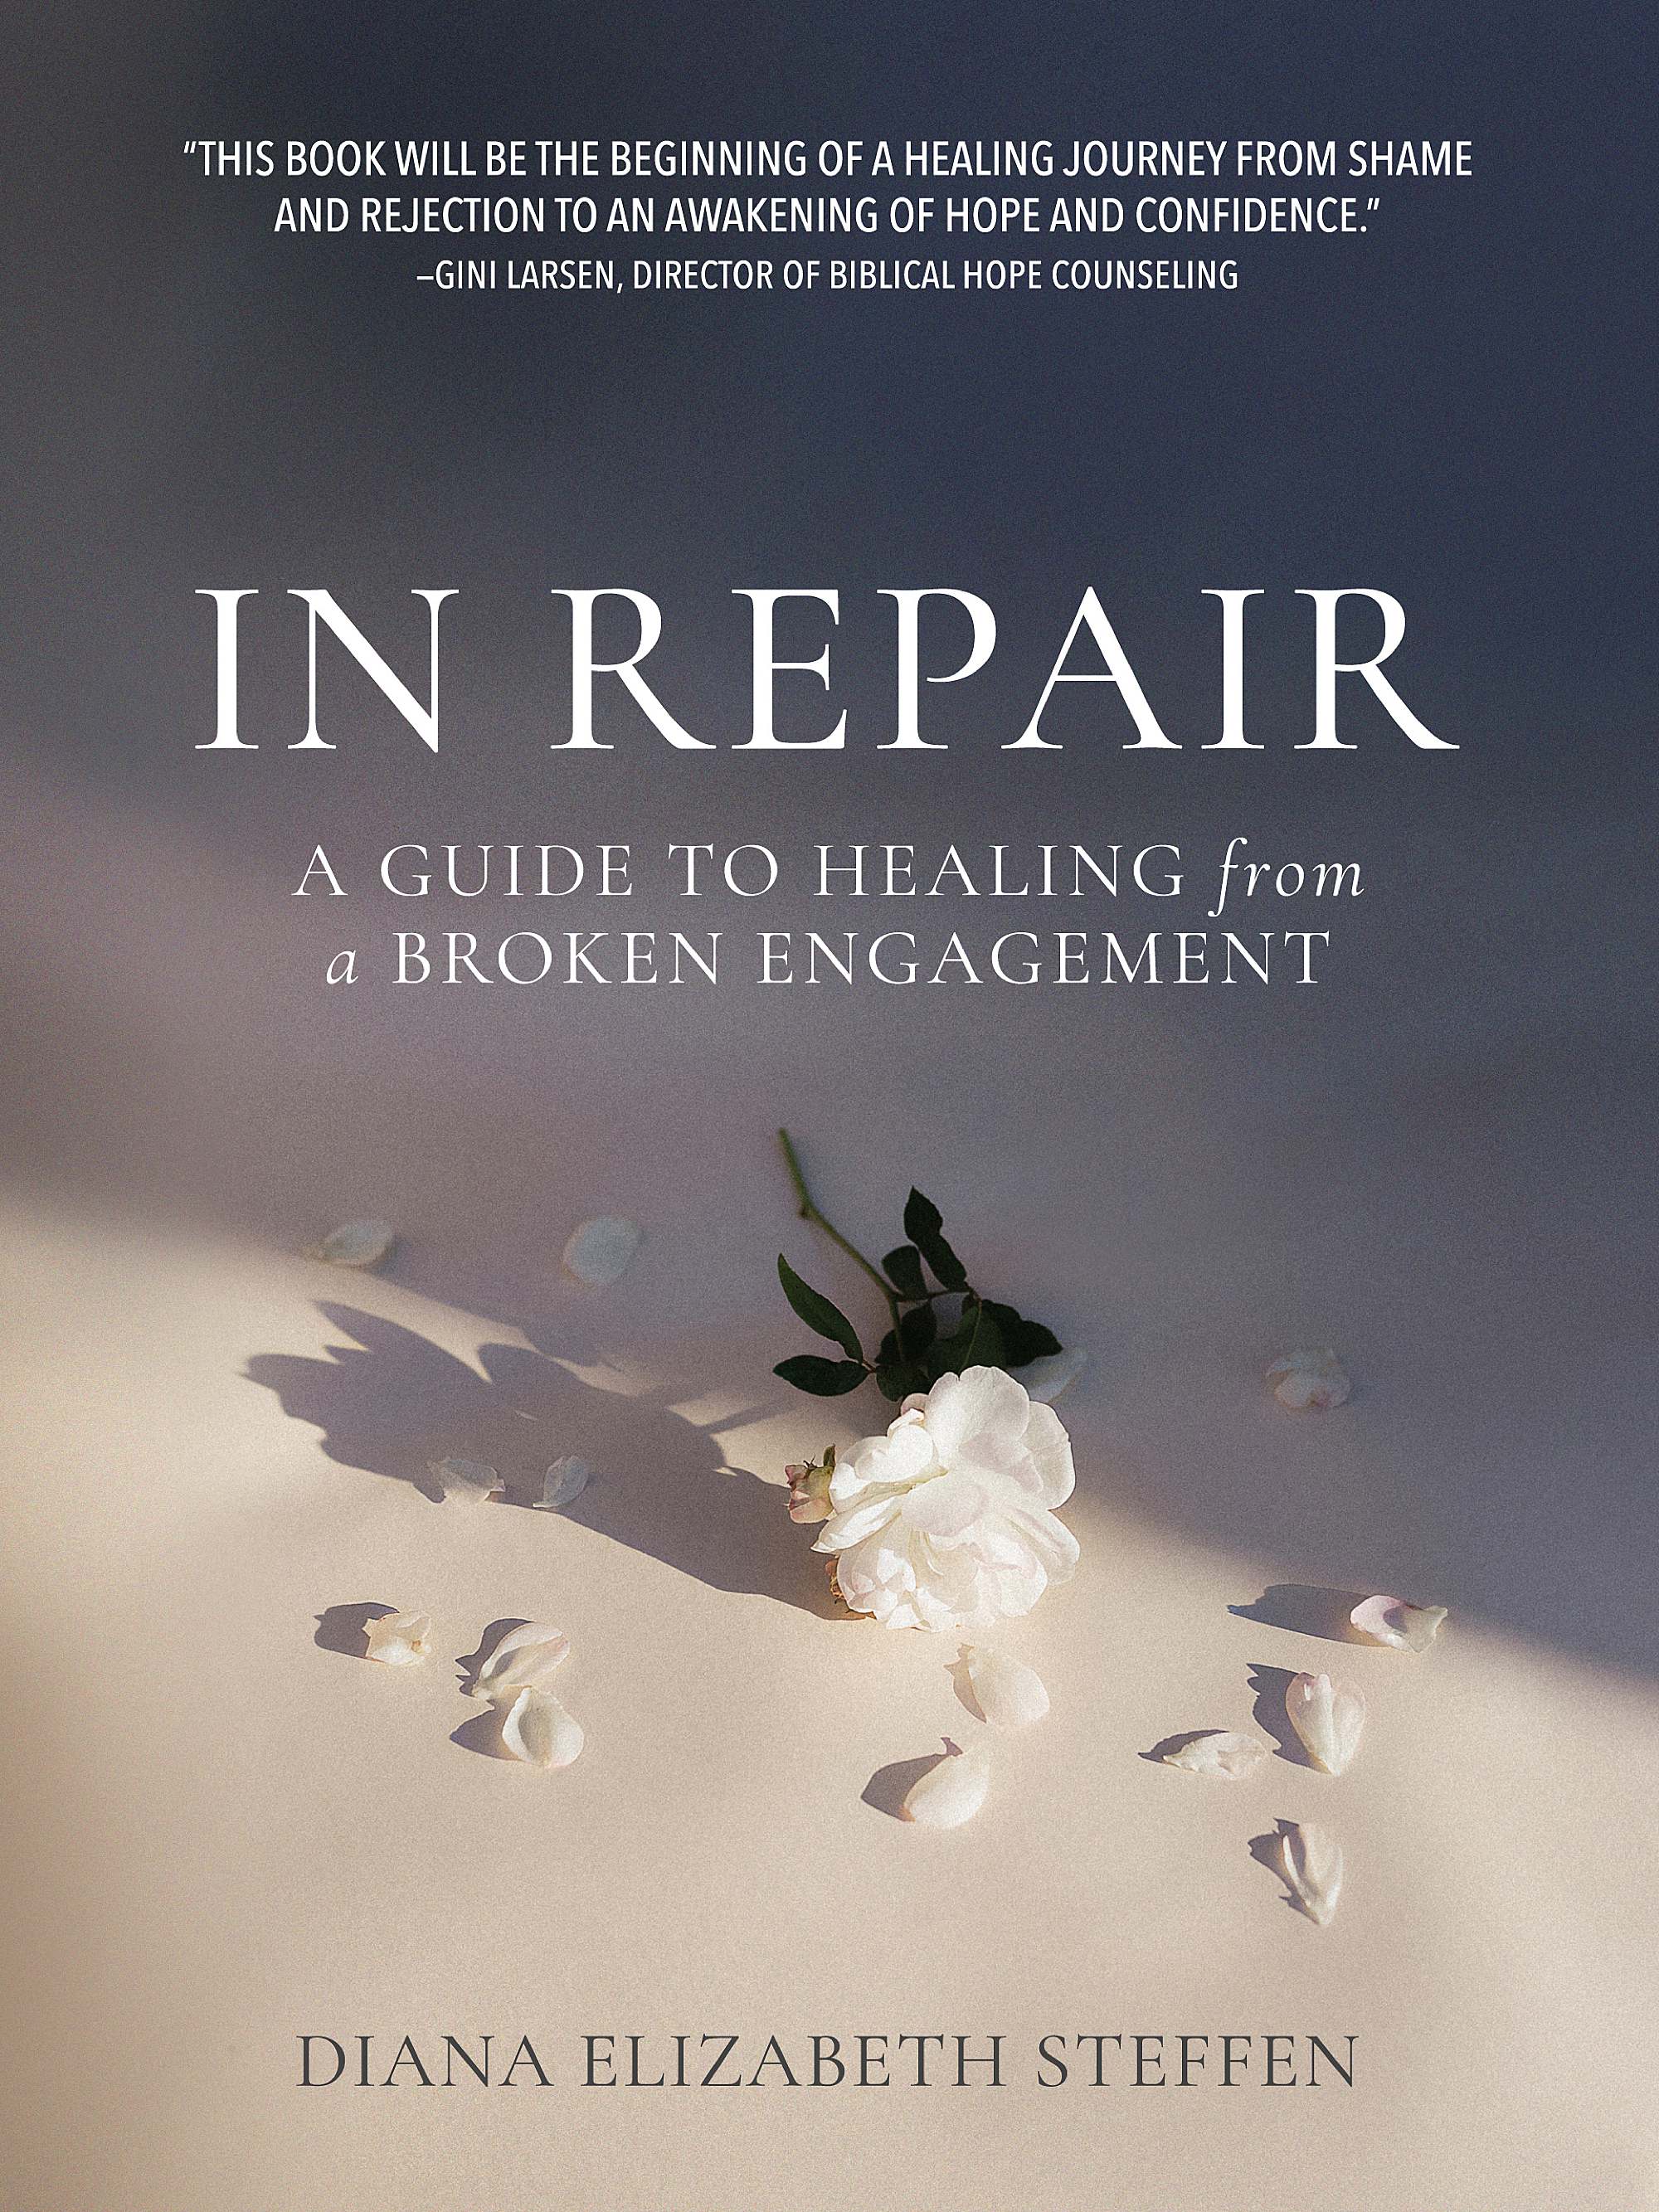 How to heal from a broken engagement called off wedding book advice break up relationship book // call of engagement broken engagement get back together survive percentage of broken engagements called off 